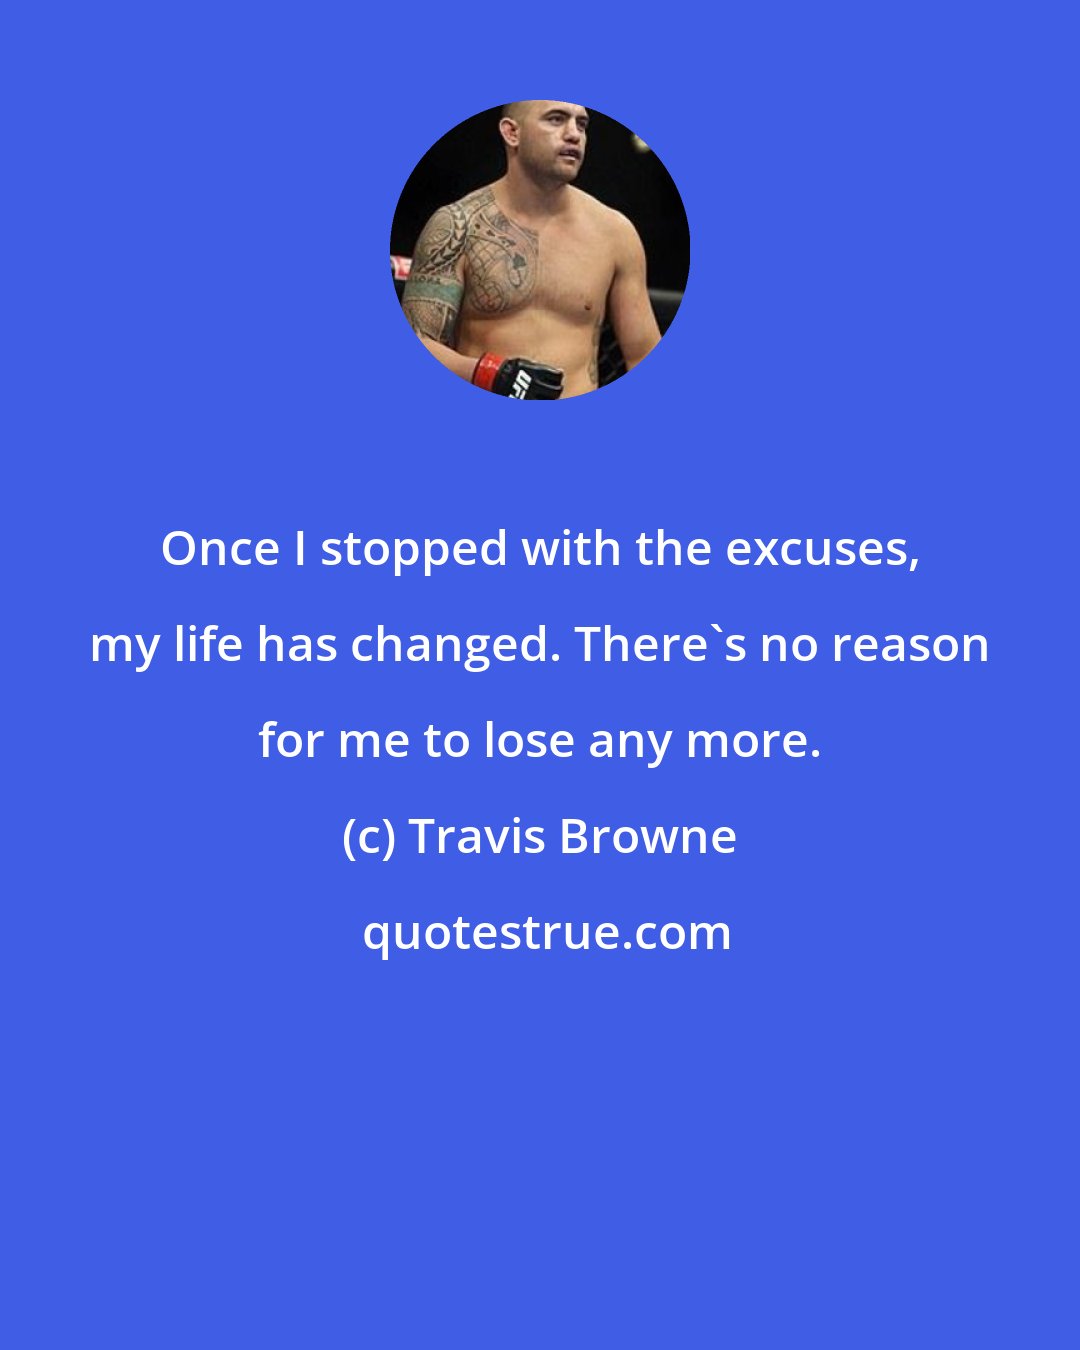 Travis Browne: Once I stopped with the excuses, my life has changed. There's no reason for me to lose any more.